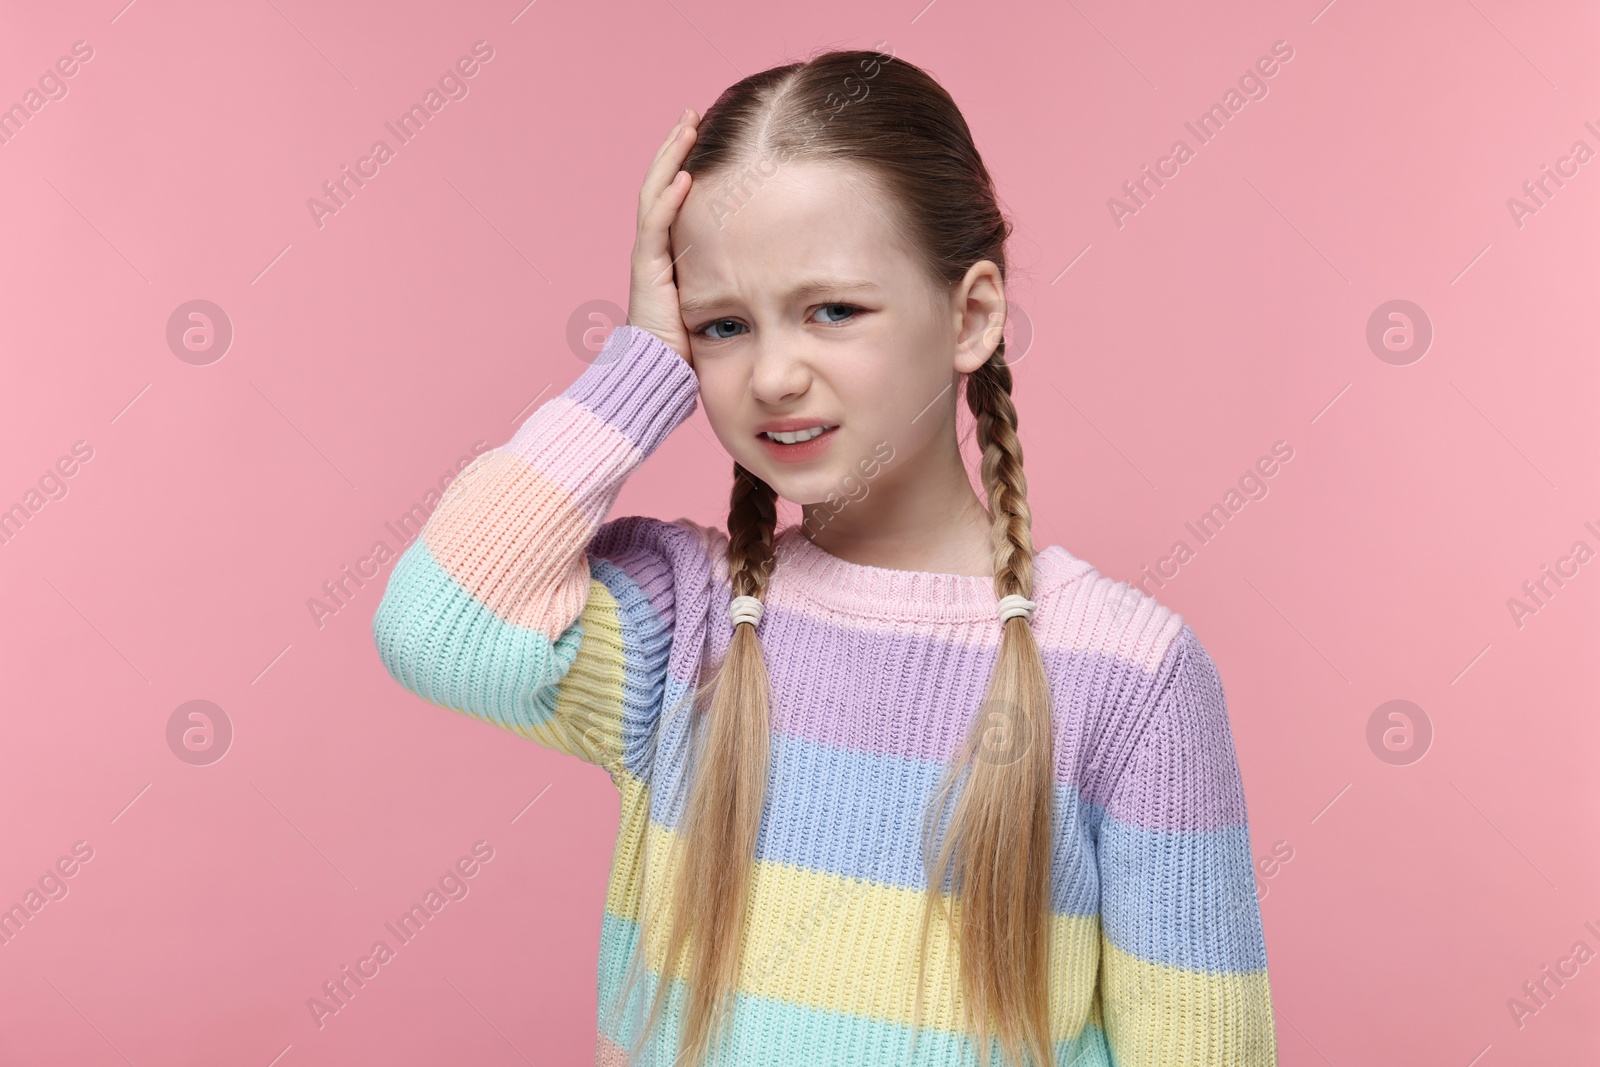 Photo of Little girl suffering from headache on pink background